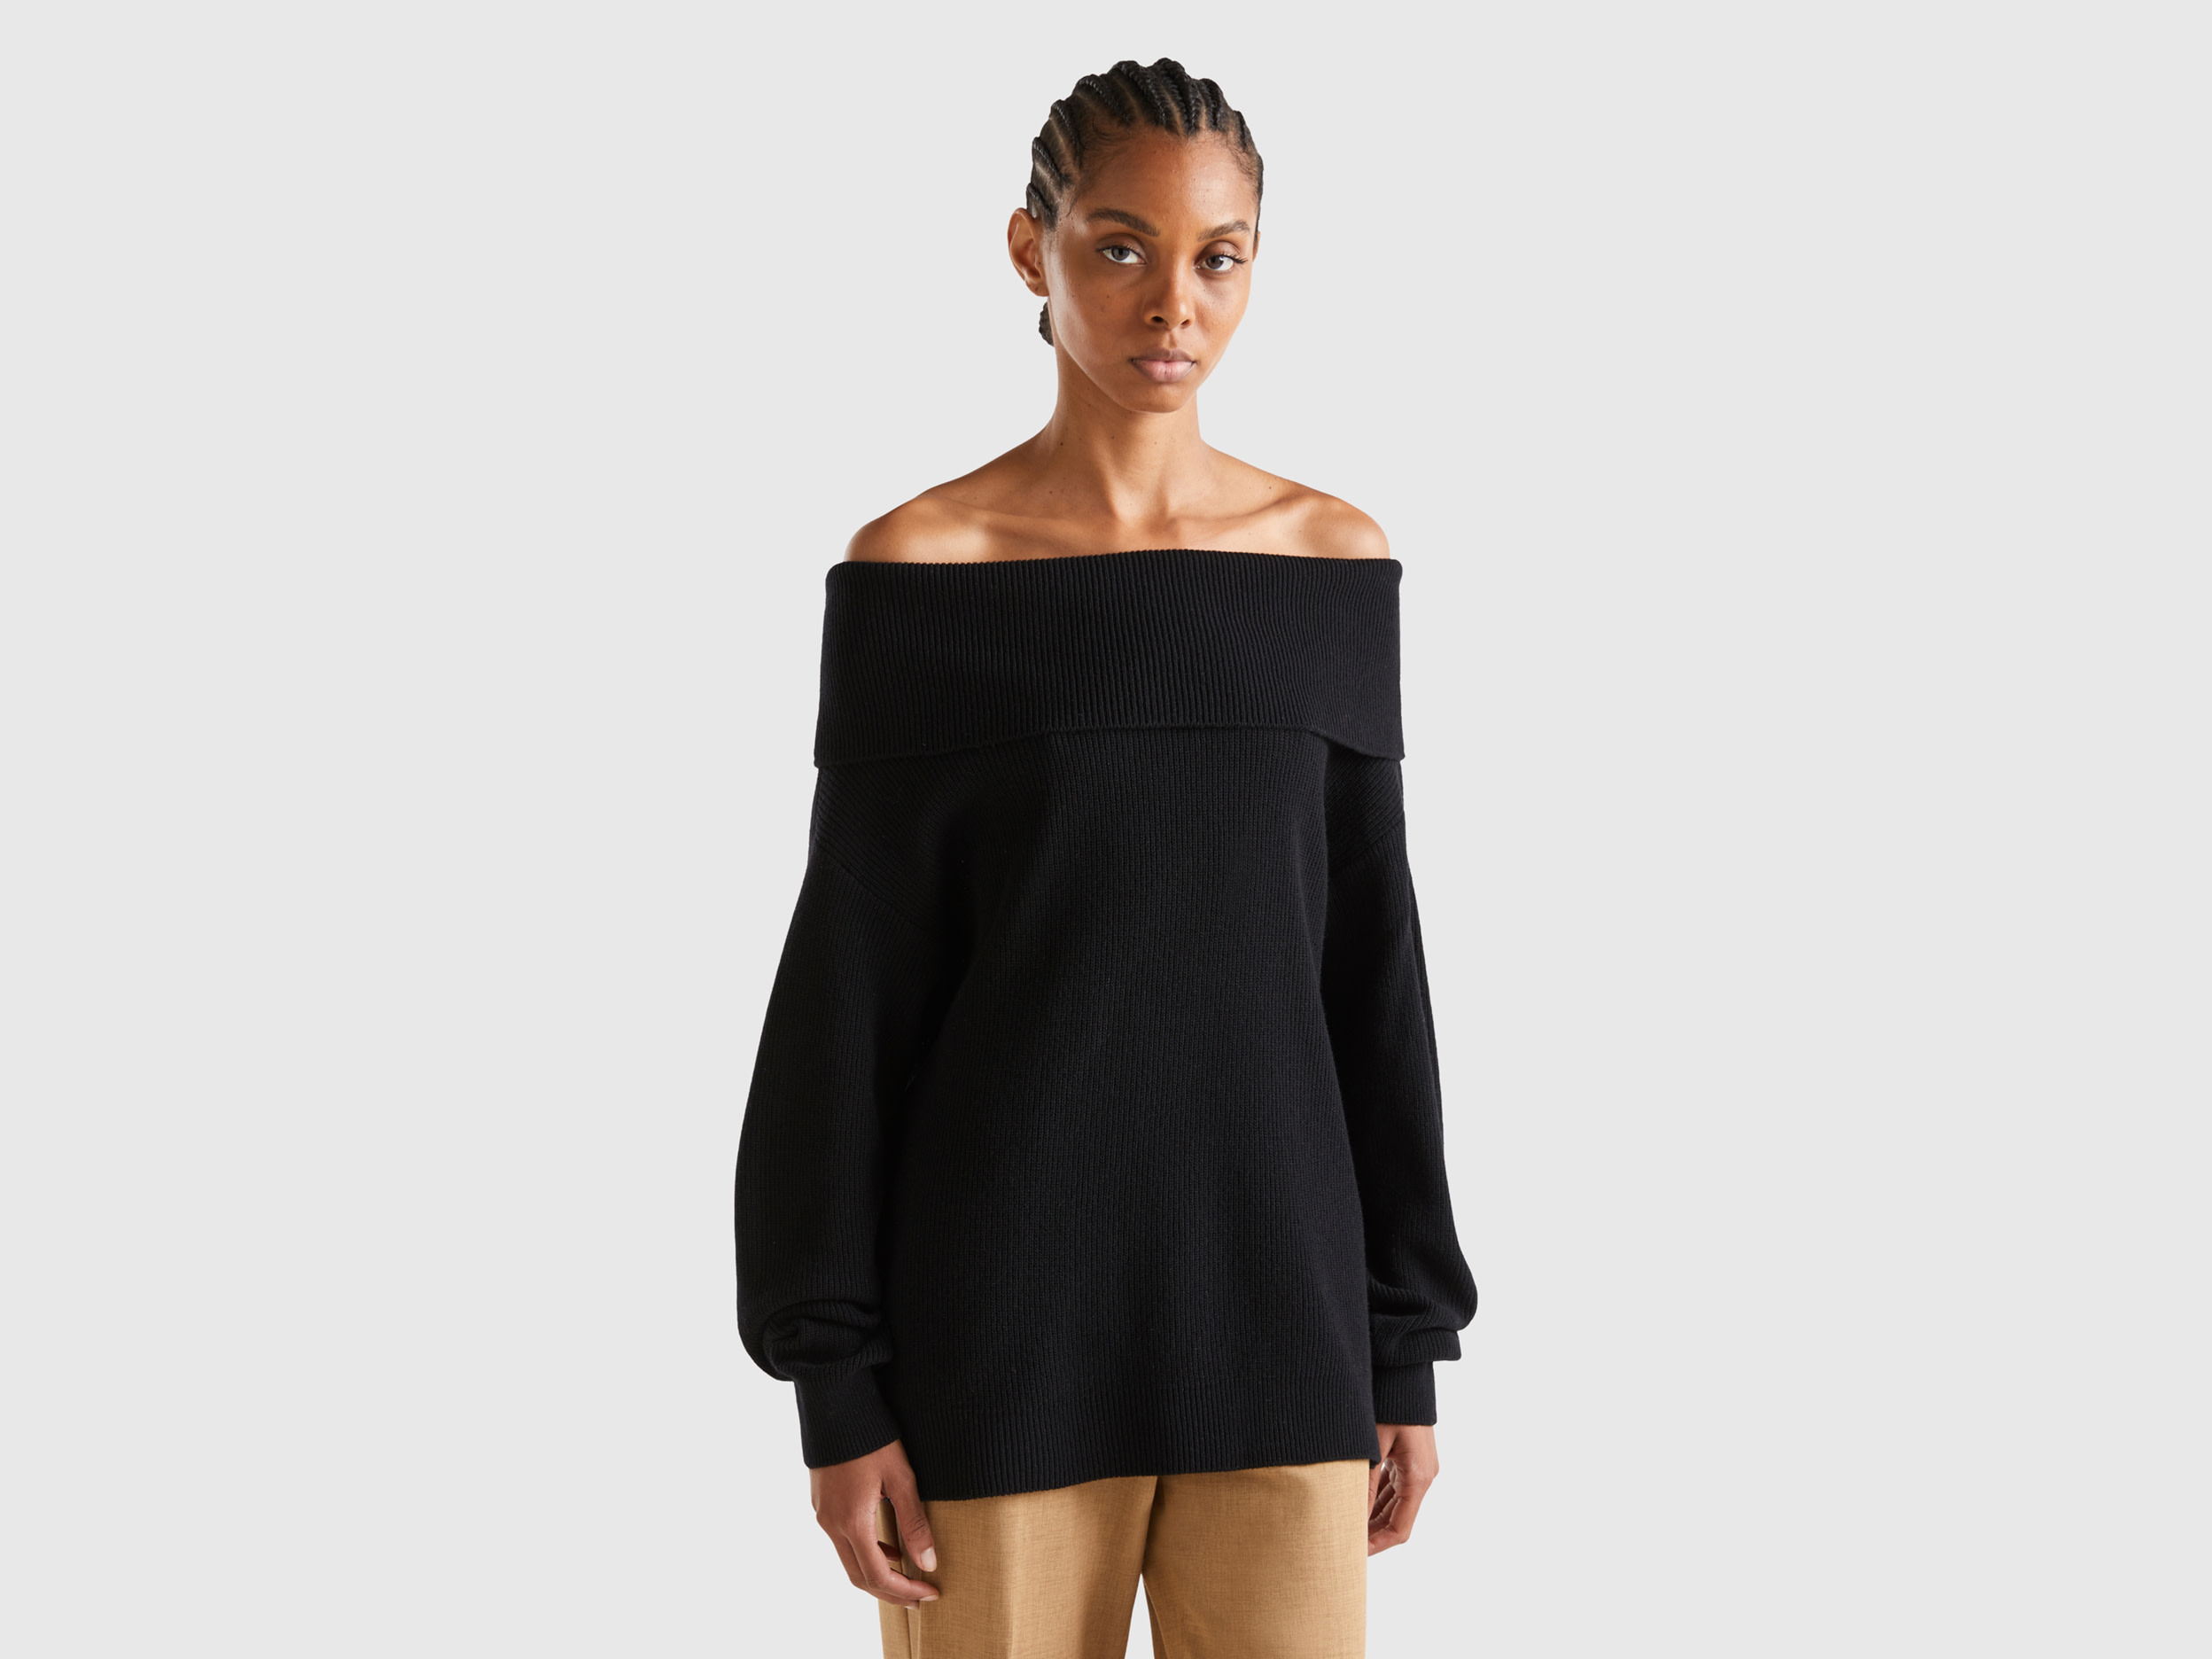 Benetton, Sweater With Bare Shoulders, size L-XL, Black, Women